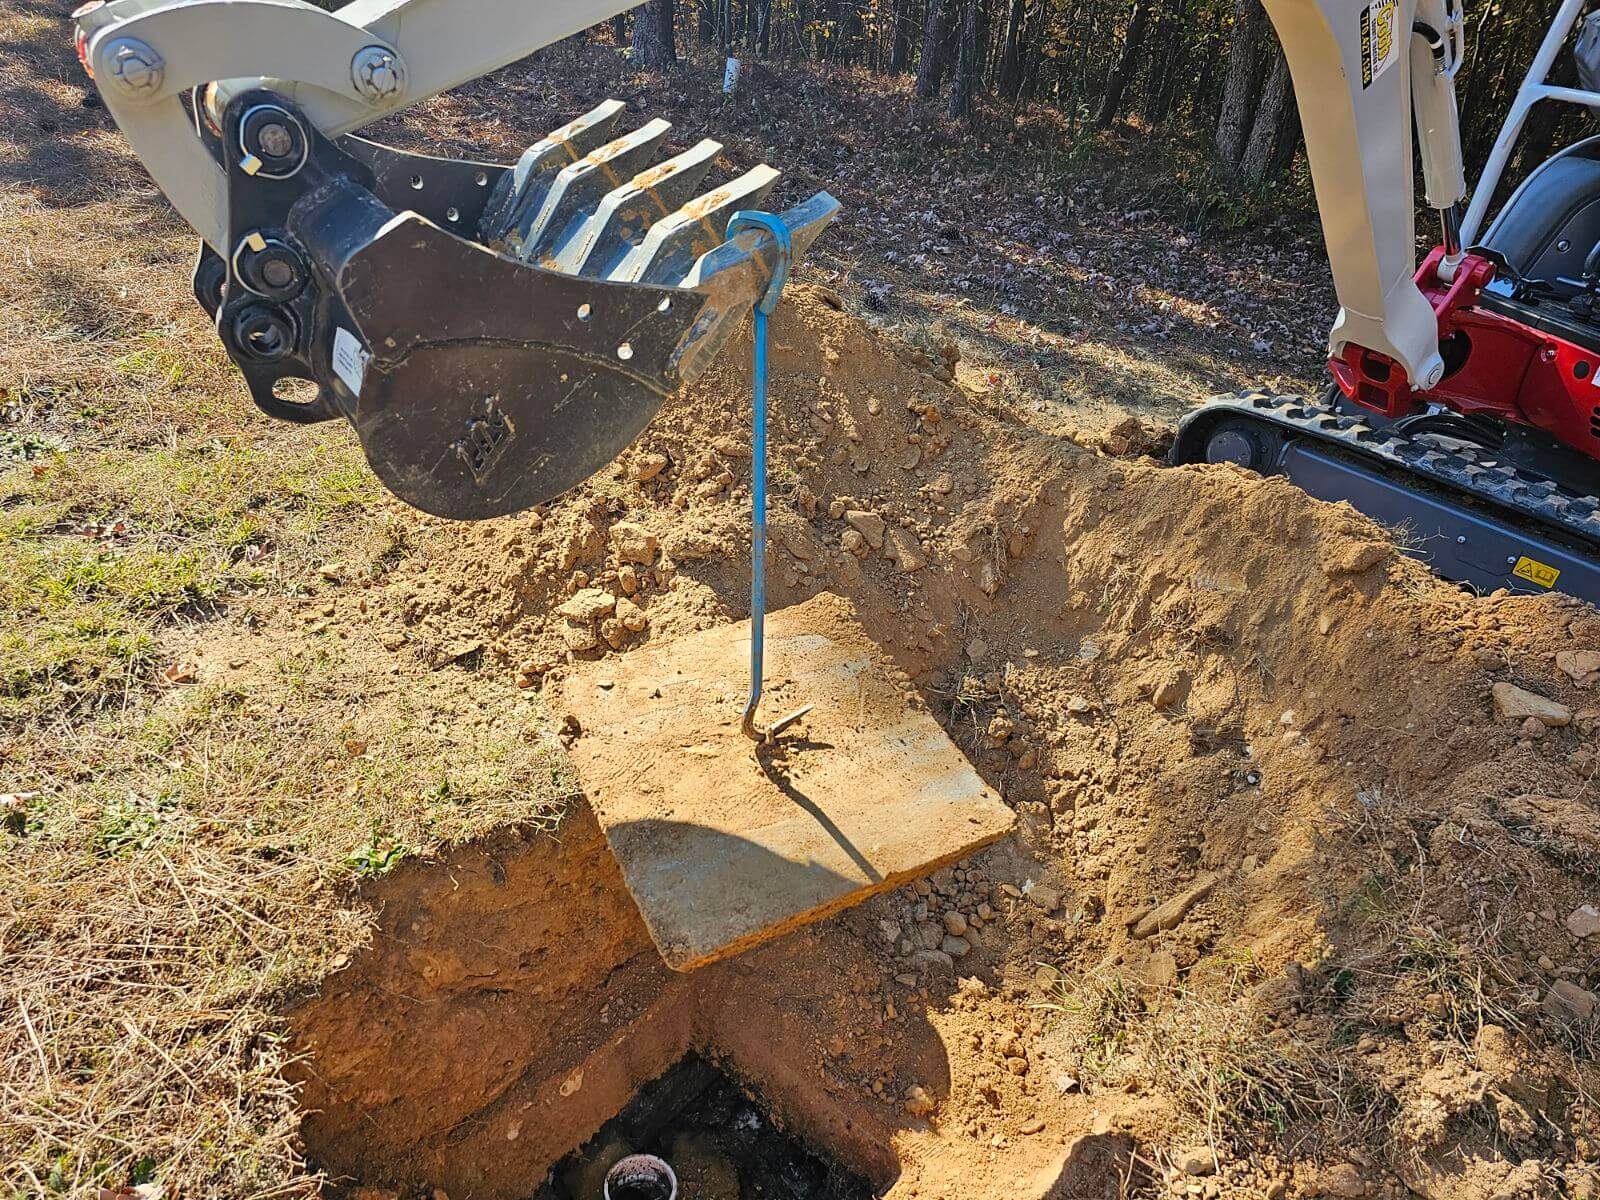 An excavator digging a hole in the ground.